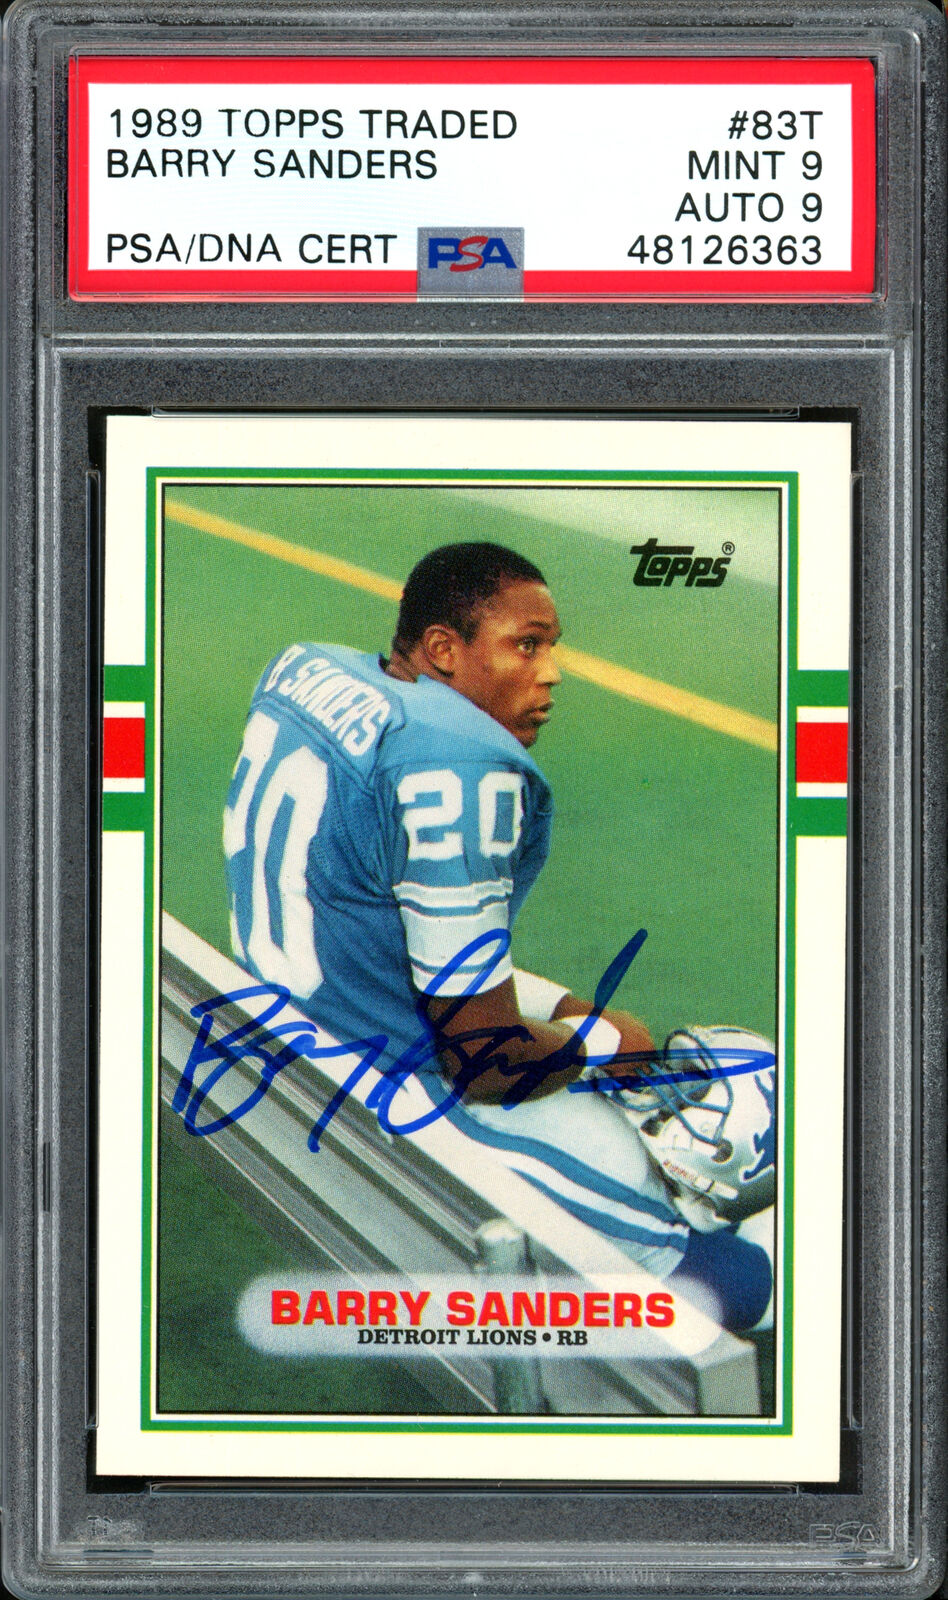 Barry Sanders 1989 Topps Traded Rookie Card Auto Grade 9 Mint 9 PSA/DNA 48126363 Image 1